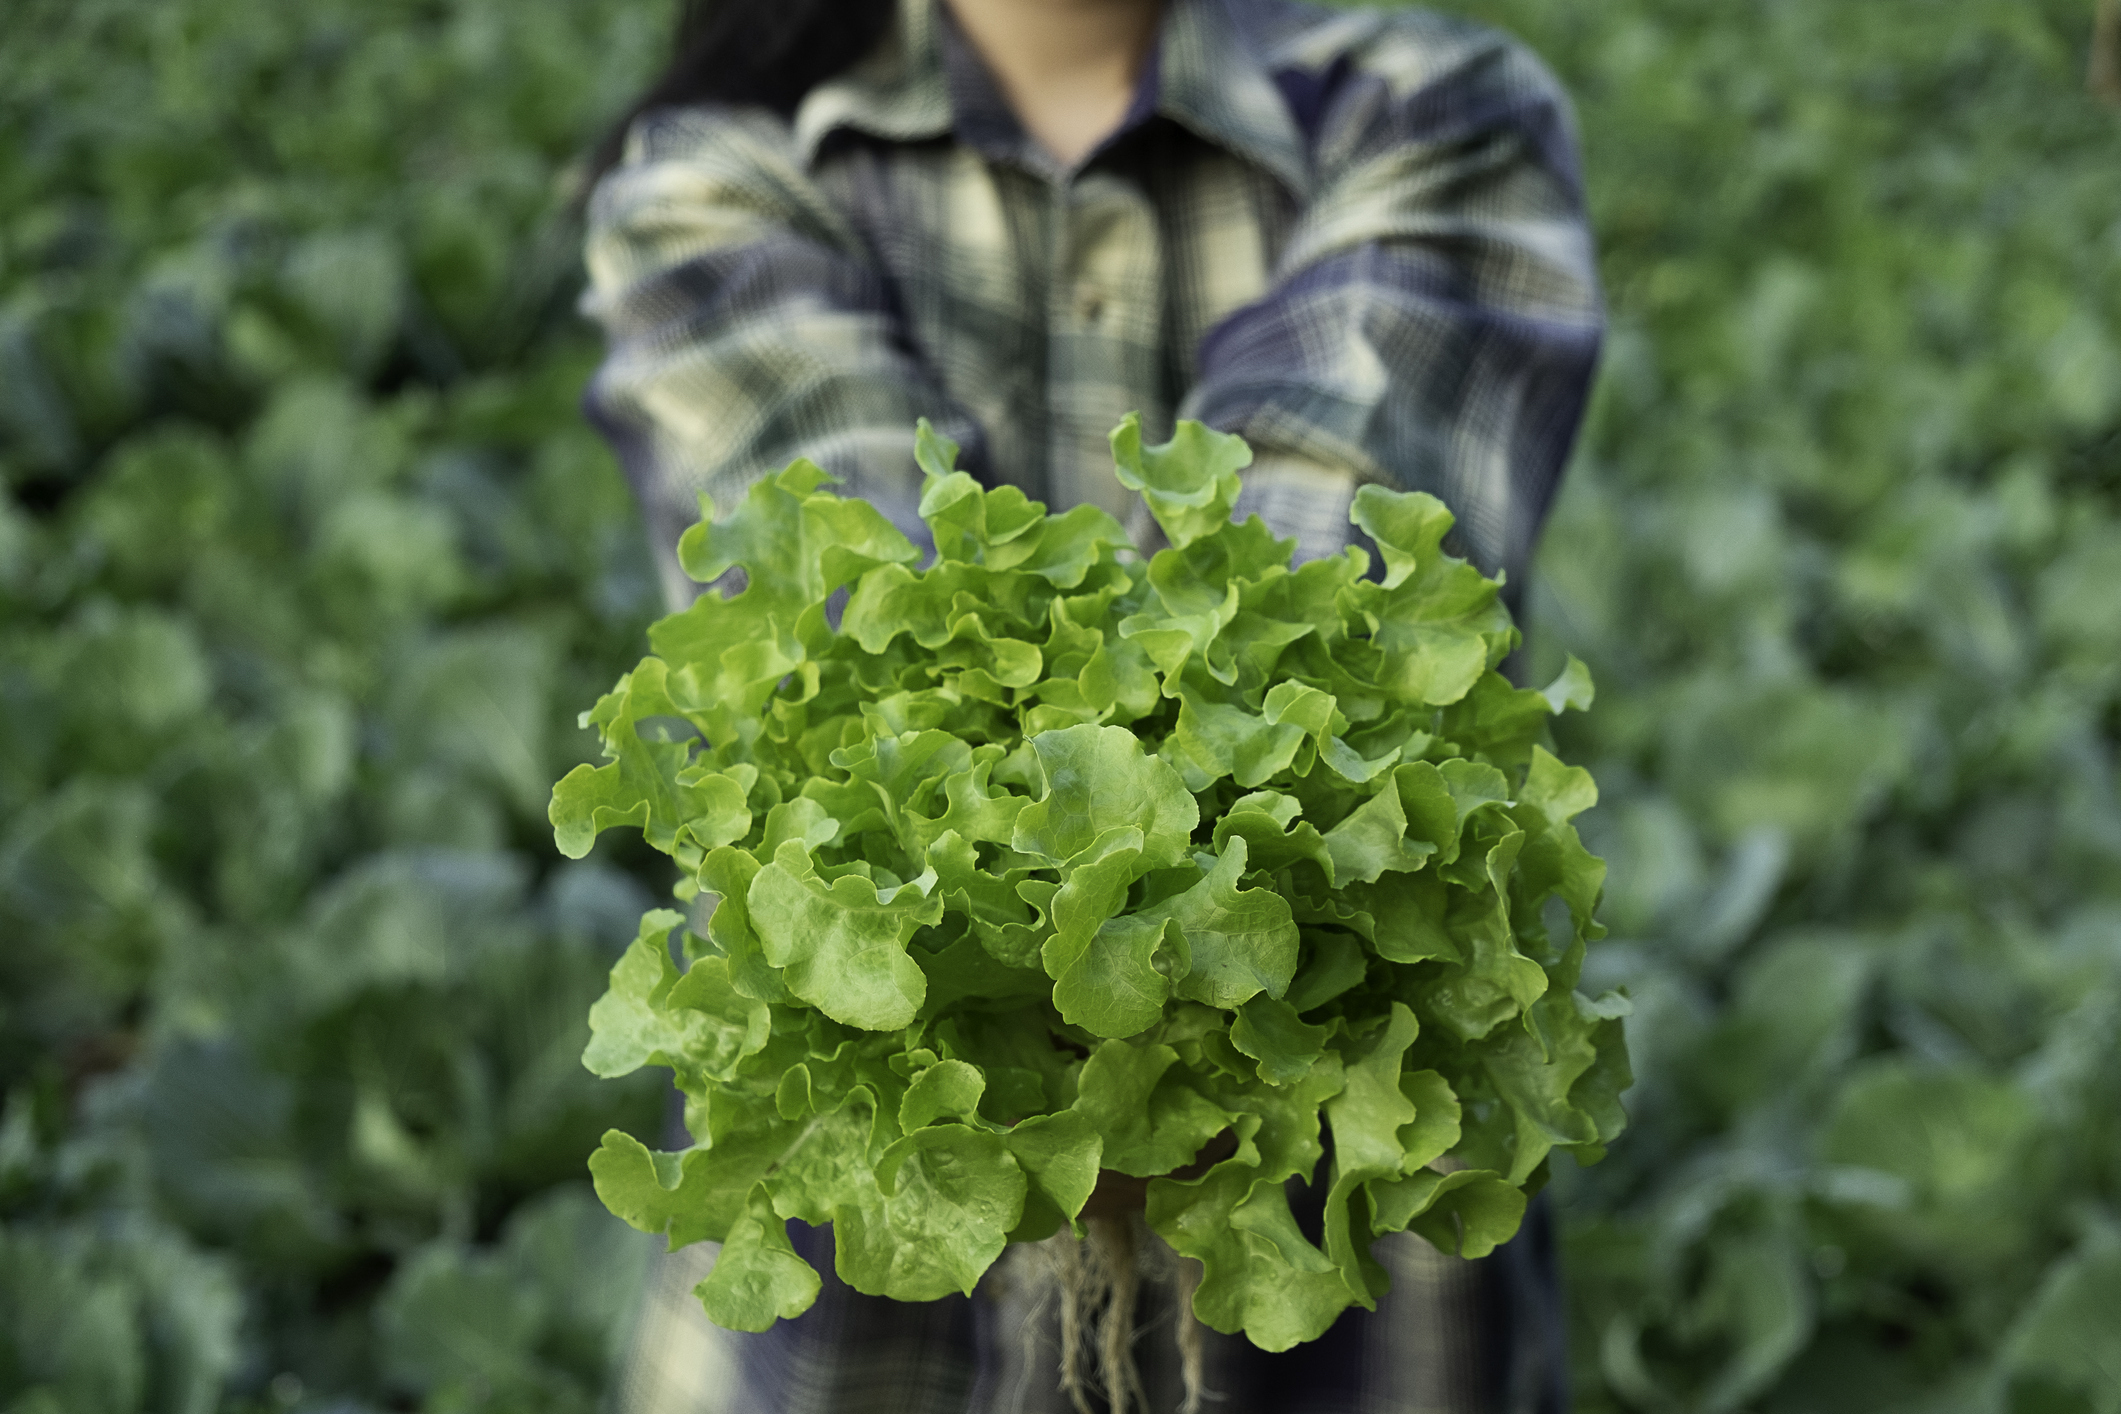 A person holds out a bunch of leafy greens